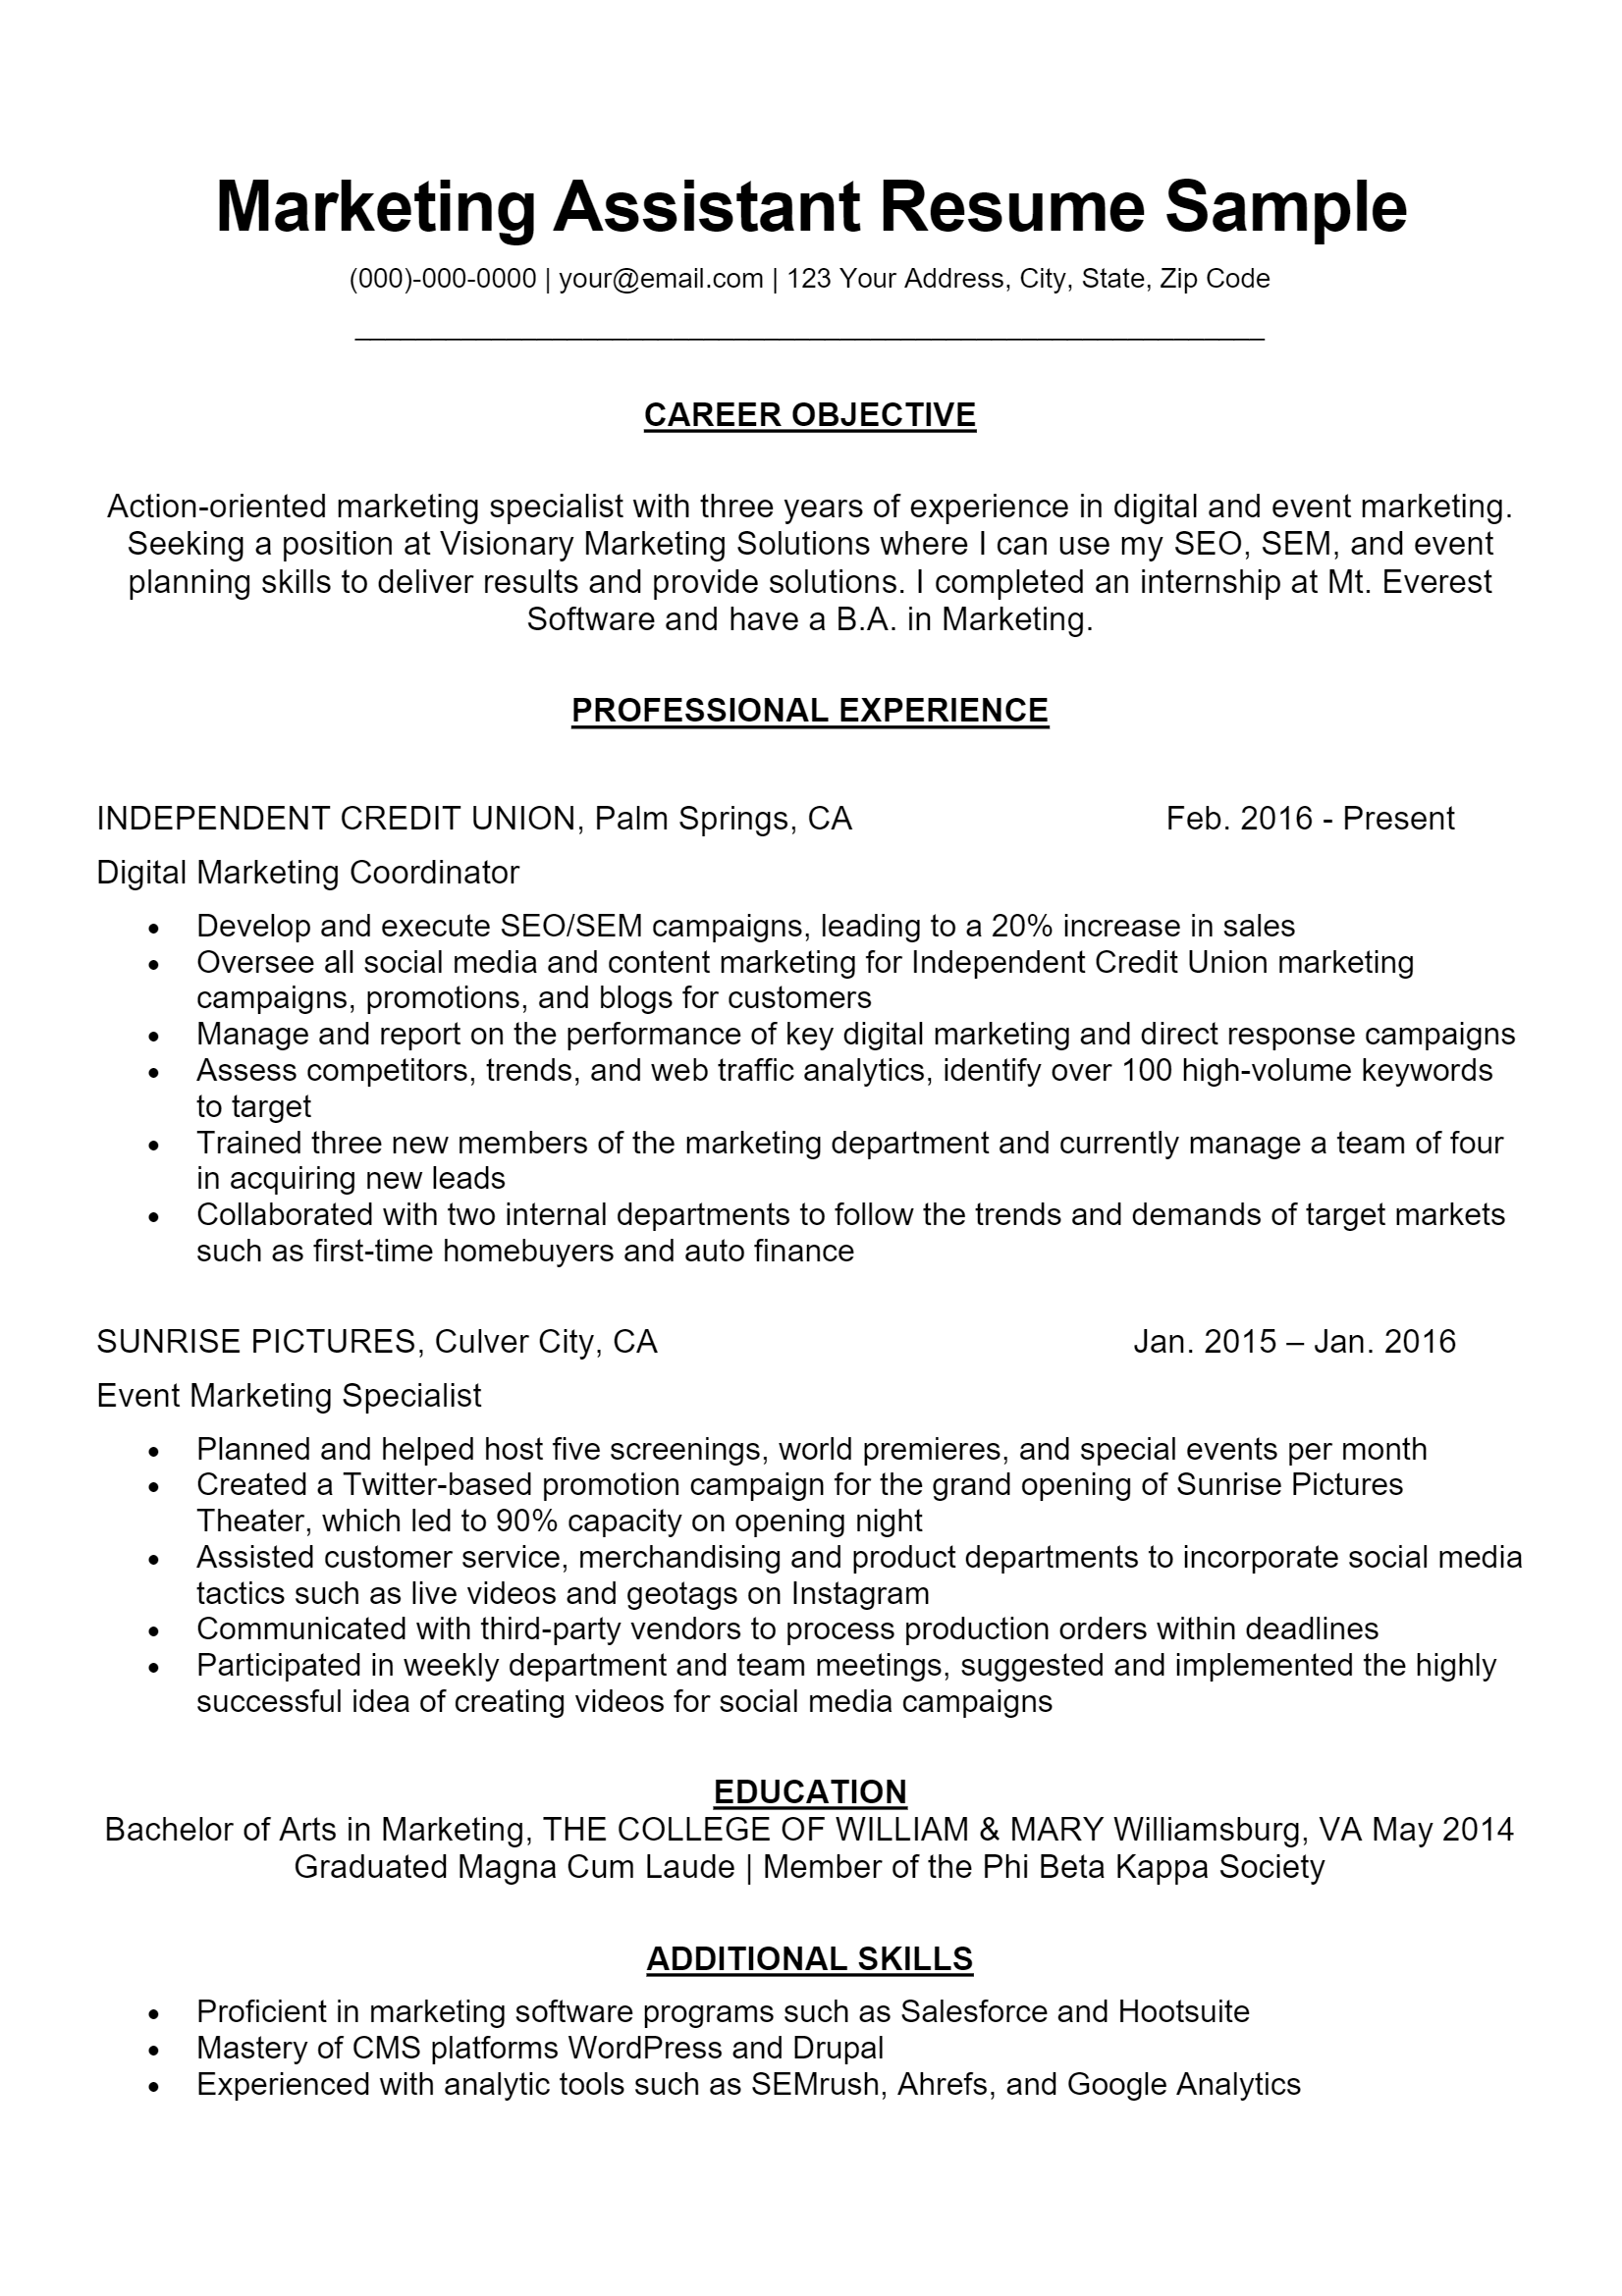 Marketing Assistant Resume .Docx (Word)